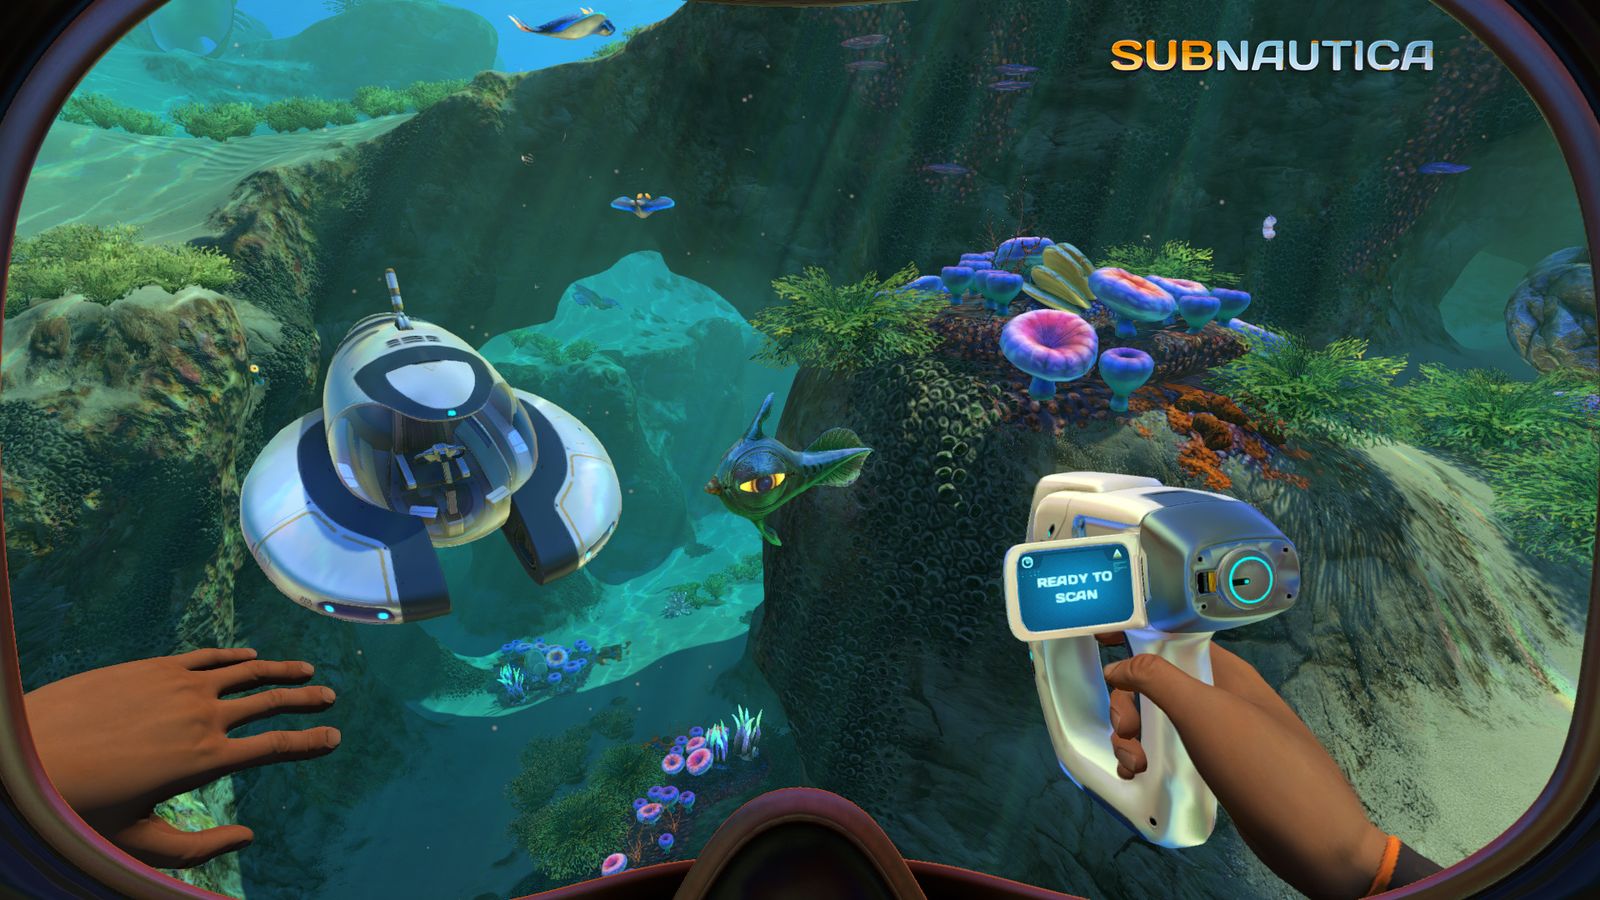 A little submersible ship underwater! There are some coral and some fish in Subnautica